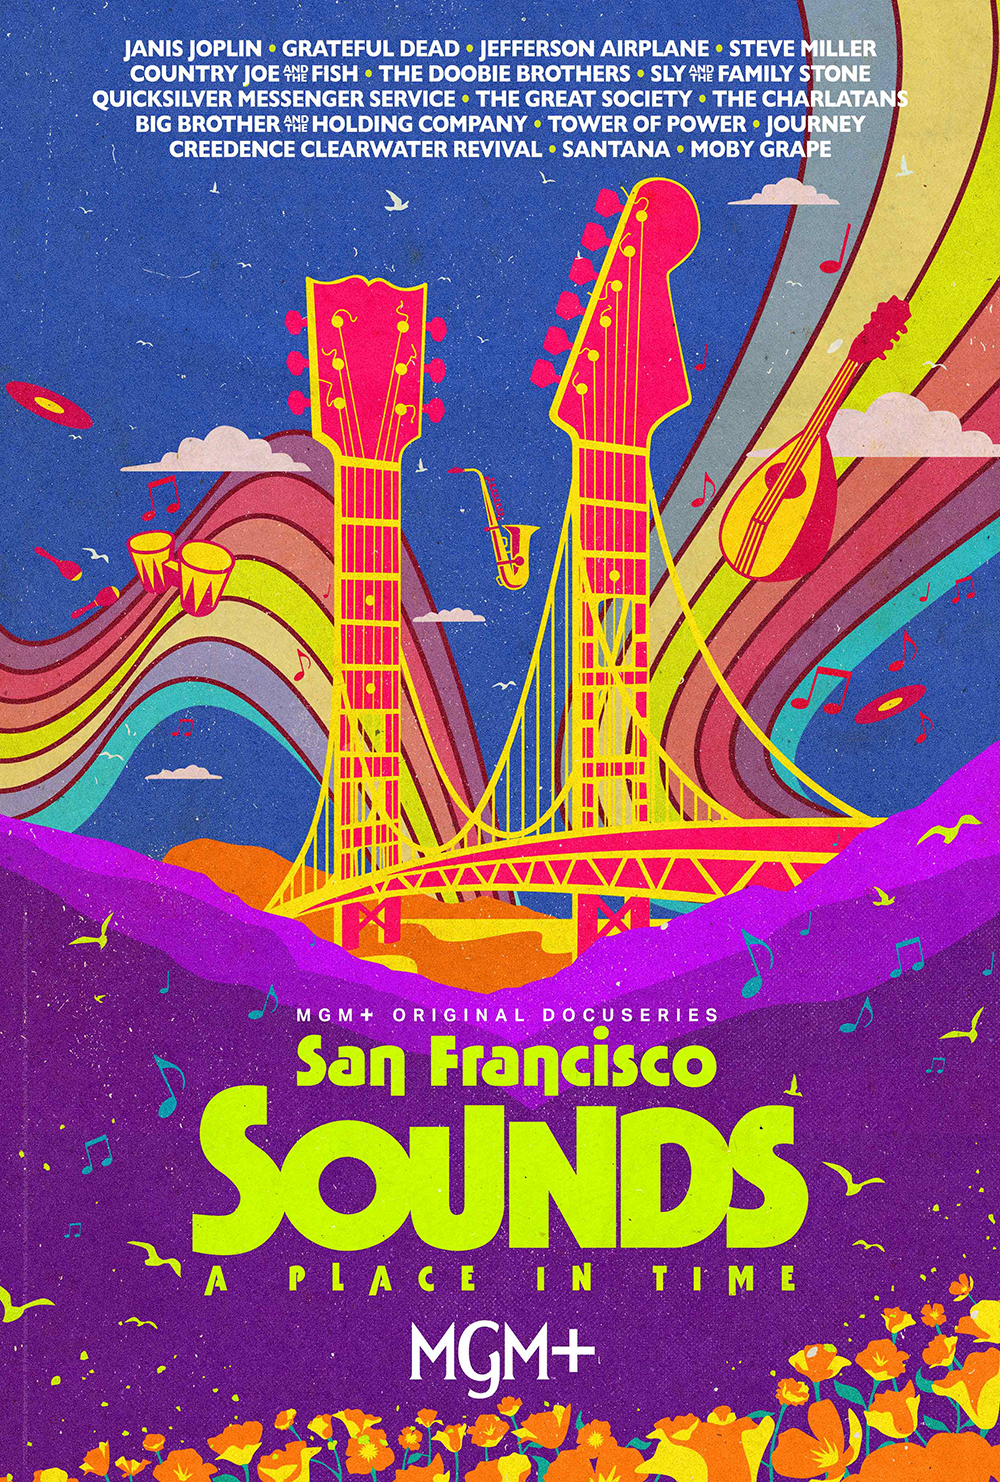 poster art for the 2023 docuseries 'San Francisco Sounds: A Place in Time." It is a psychedelic, colorful illustration with rainbows and guitar necks above the title. Above the art is a list of several of the bands featured in the series, including Grateful Dead, Jefferson Airplane, Journey and more.